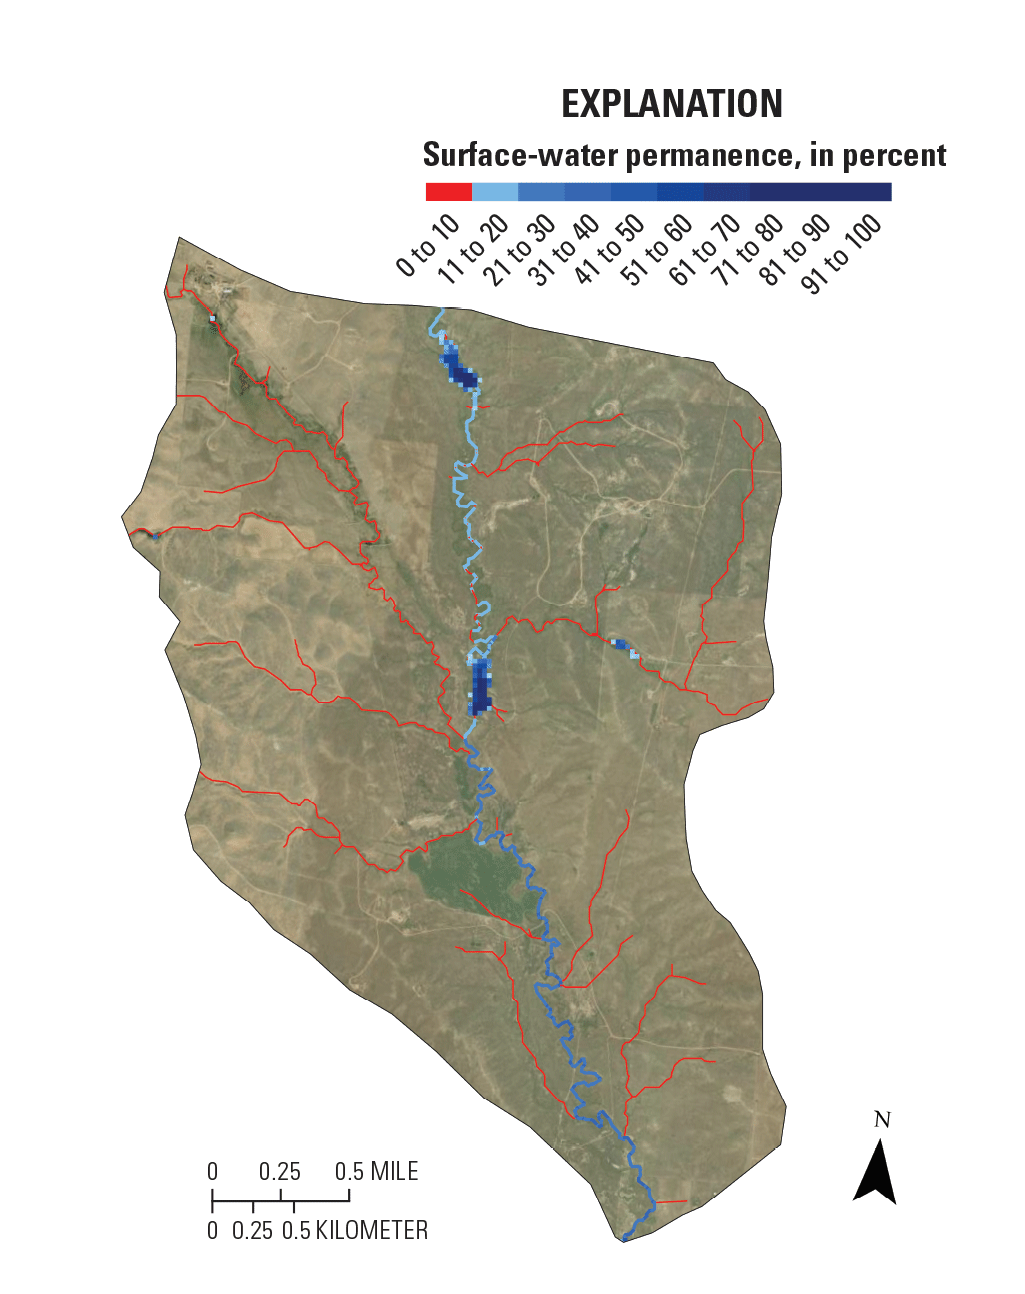 Example SWIPe map showing surface-water permanence, in percent.